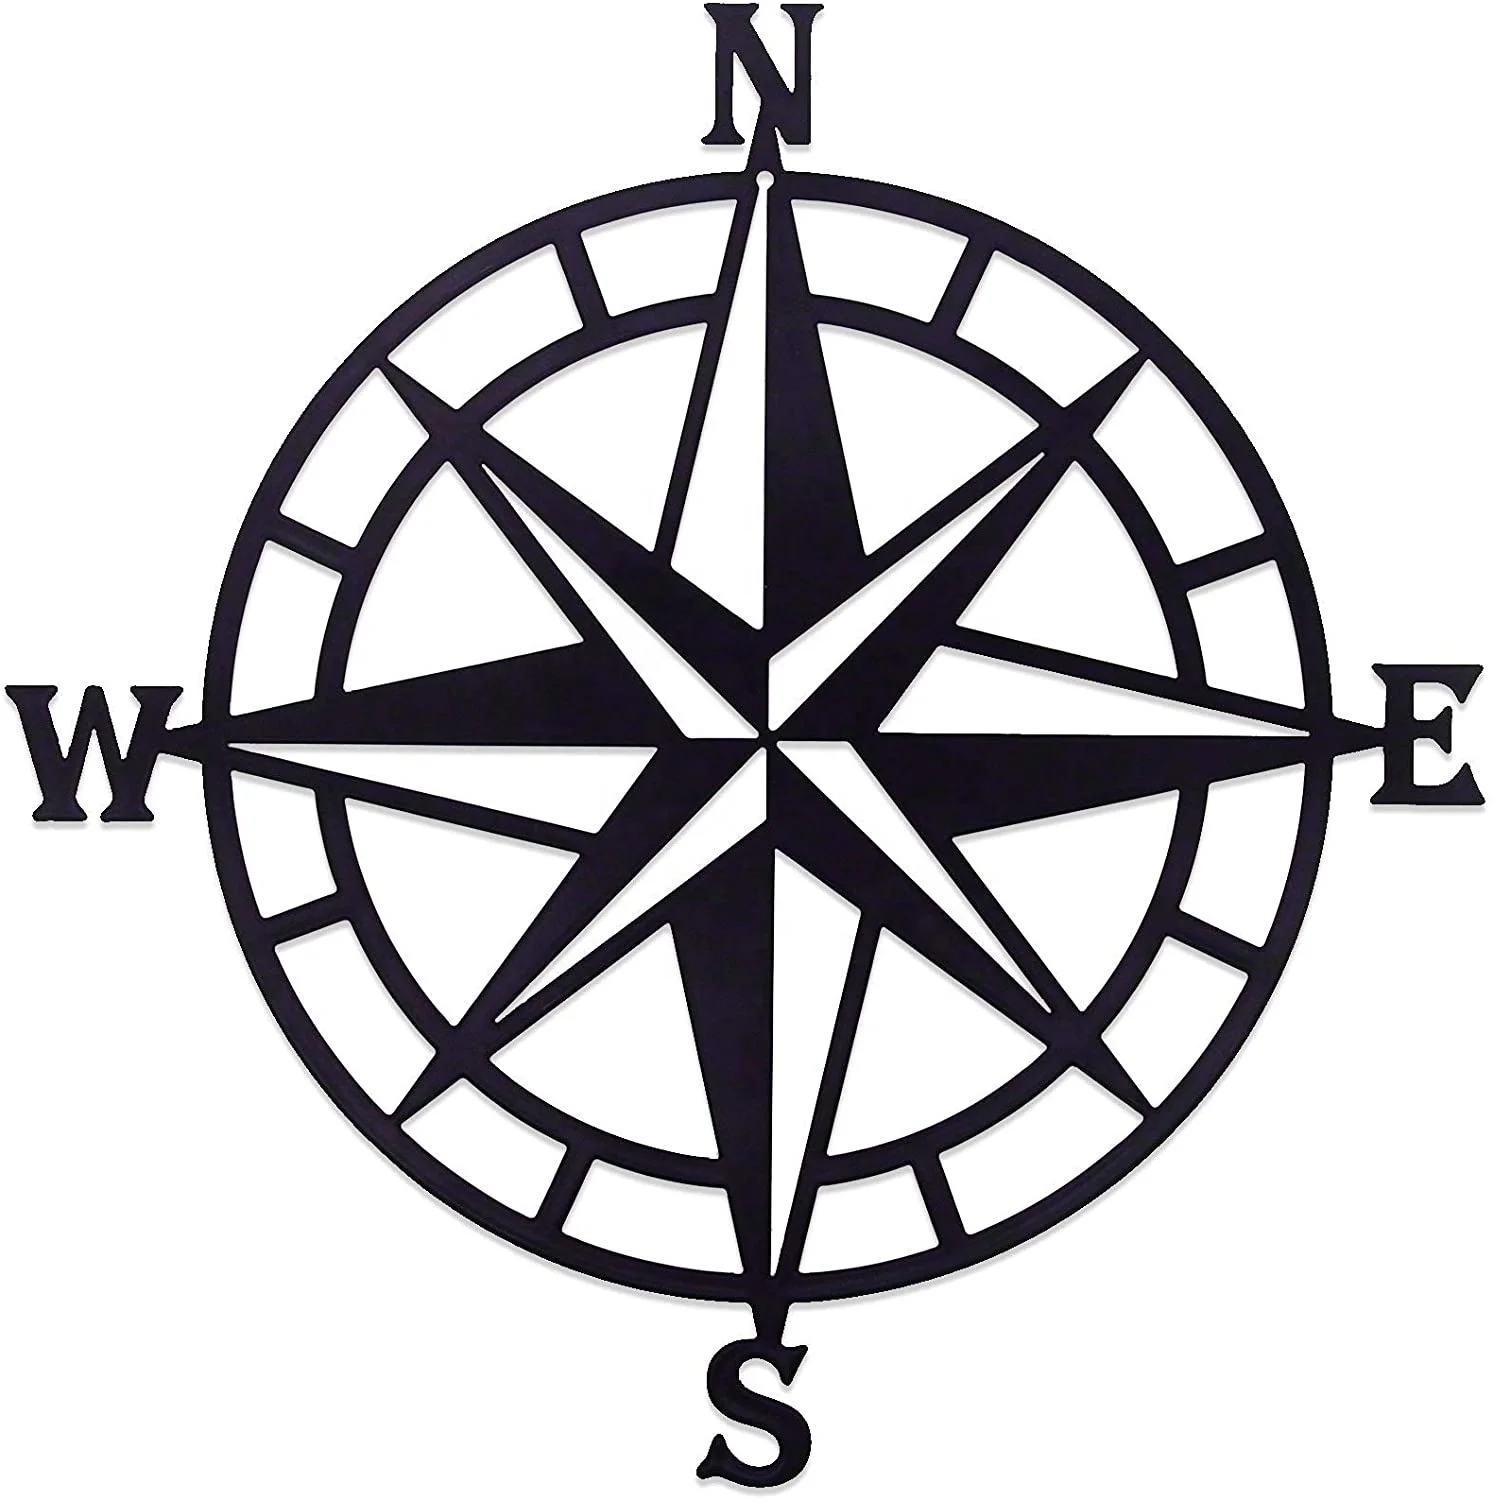 11 Inches Metal Decorative Nautical Compass Wall Decor, Living Room Bedroom Office Porch Garden Patio Signs Wall Hanging Art